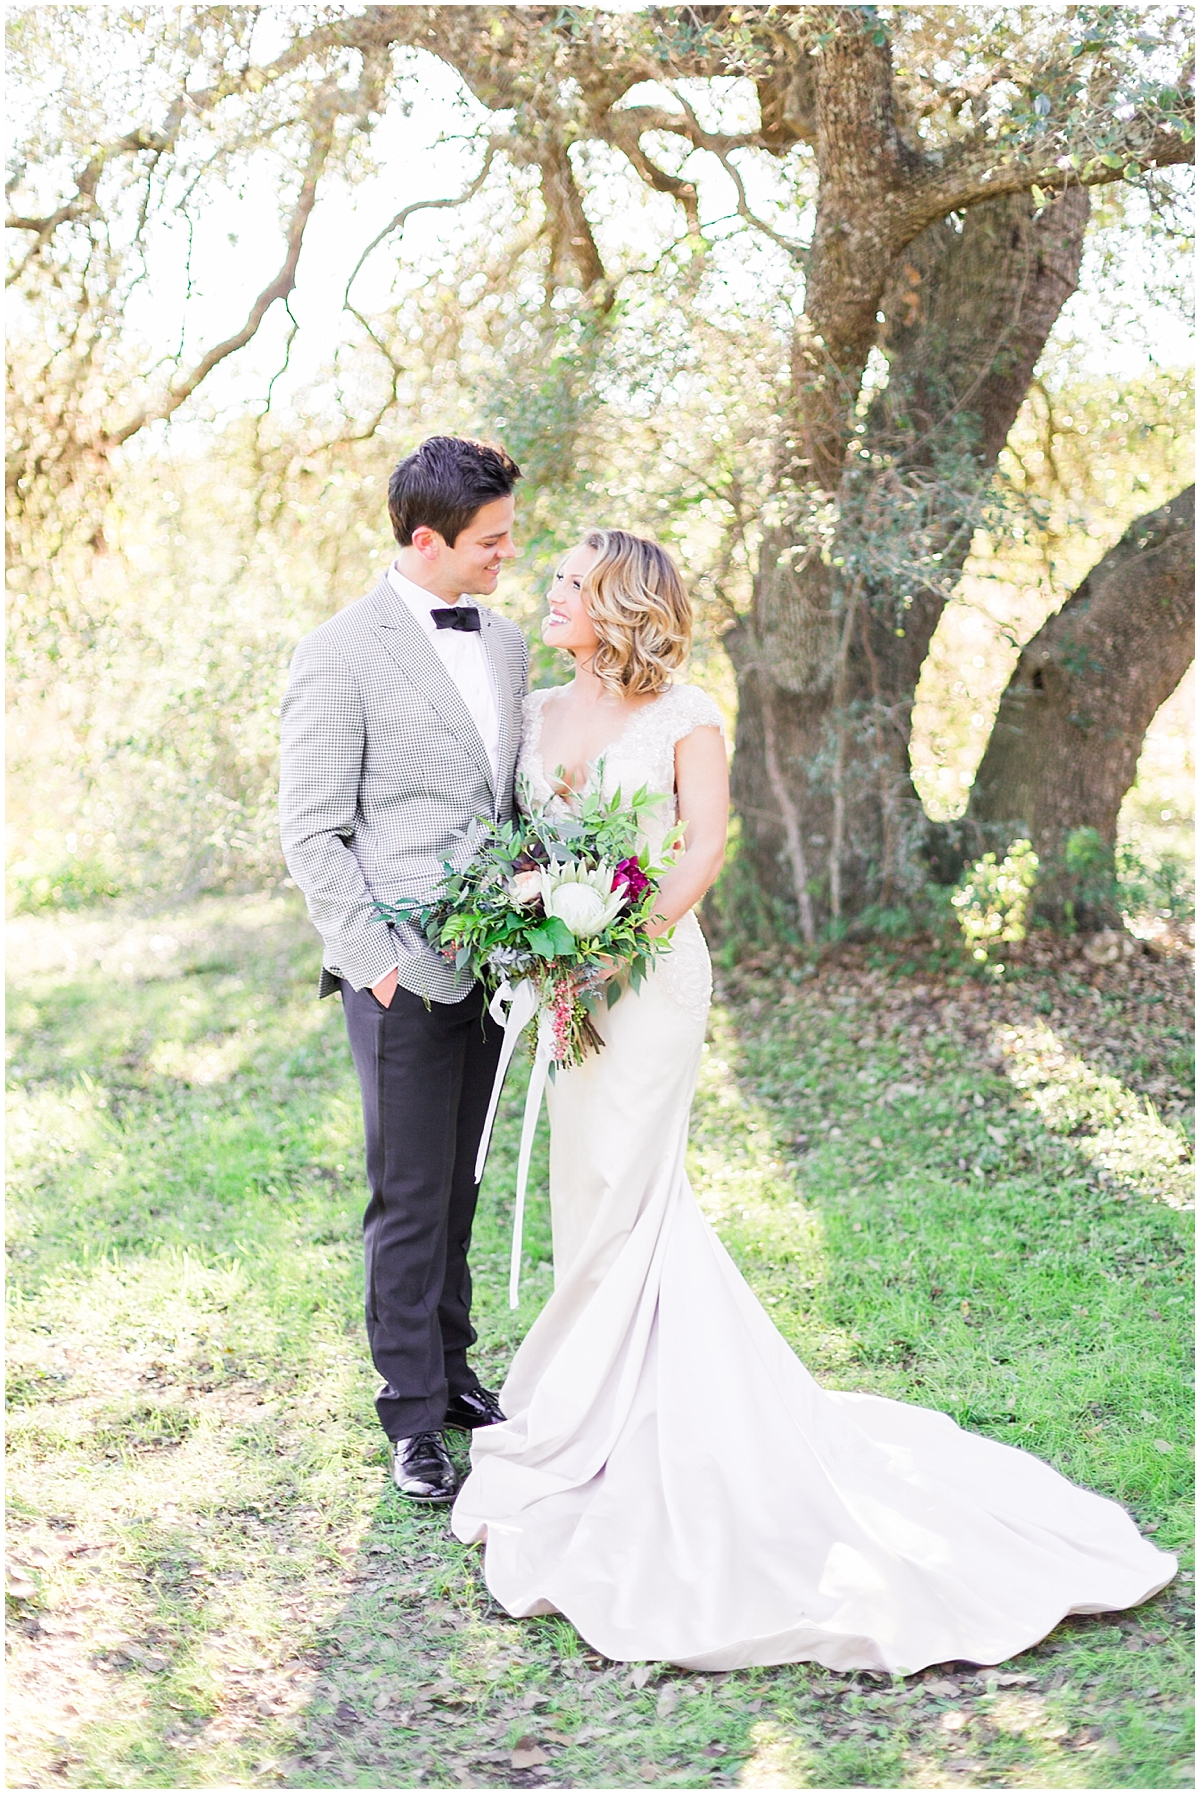 a-classic-modern-black-and-white-wedding-with-gold-accents-inspirational-shoot-at-pecan-springs-ranch-by-allison-jeffers-wedding-photography-dripping-springs-wedding-photographer_0016